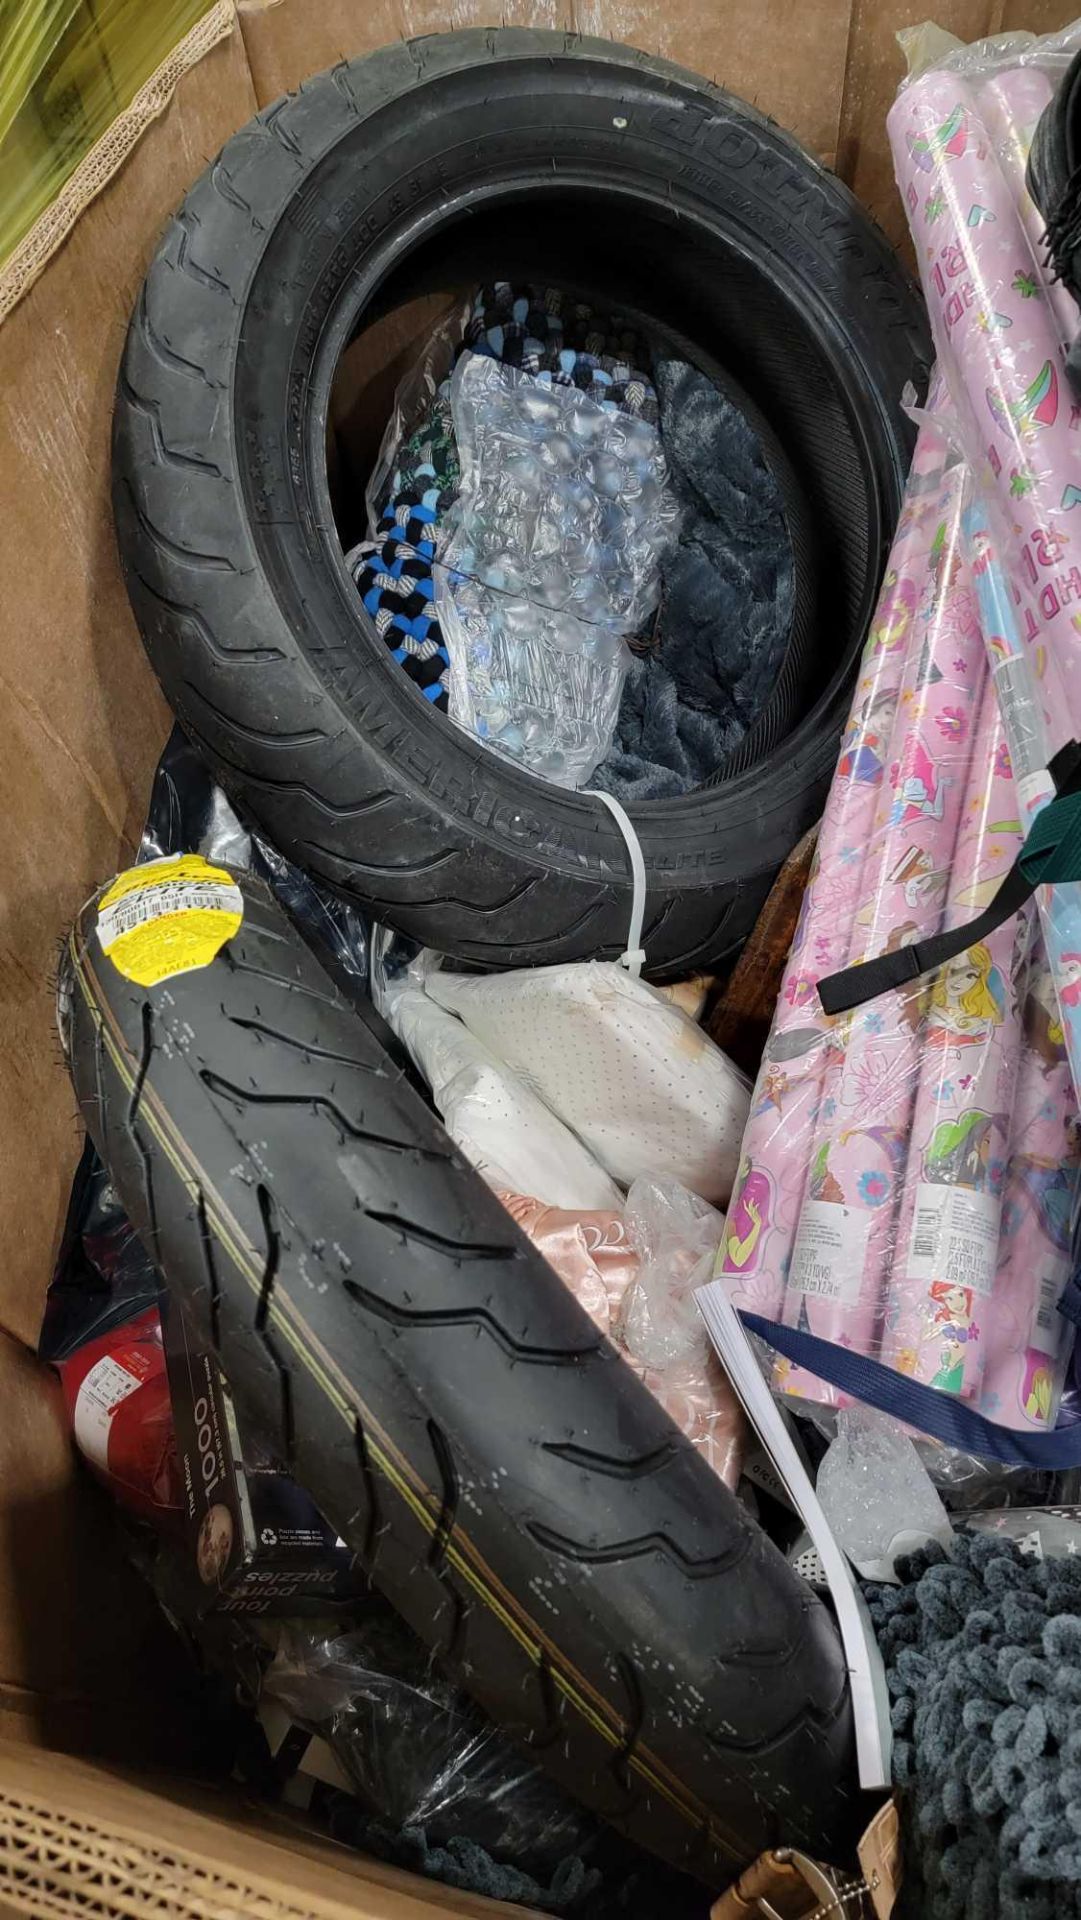 Motorcycle Tires, Wrapping Paper, Backpacks - Image 13 of 14